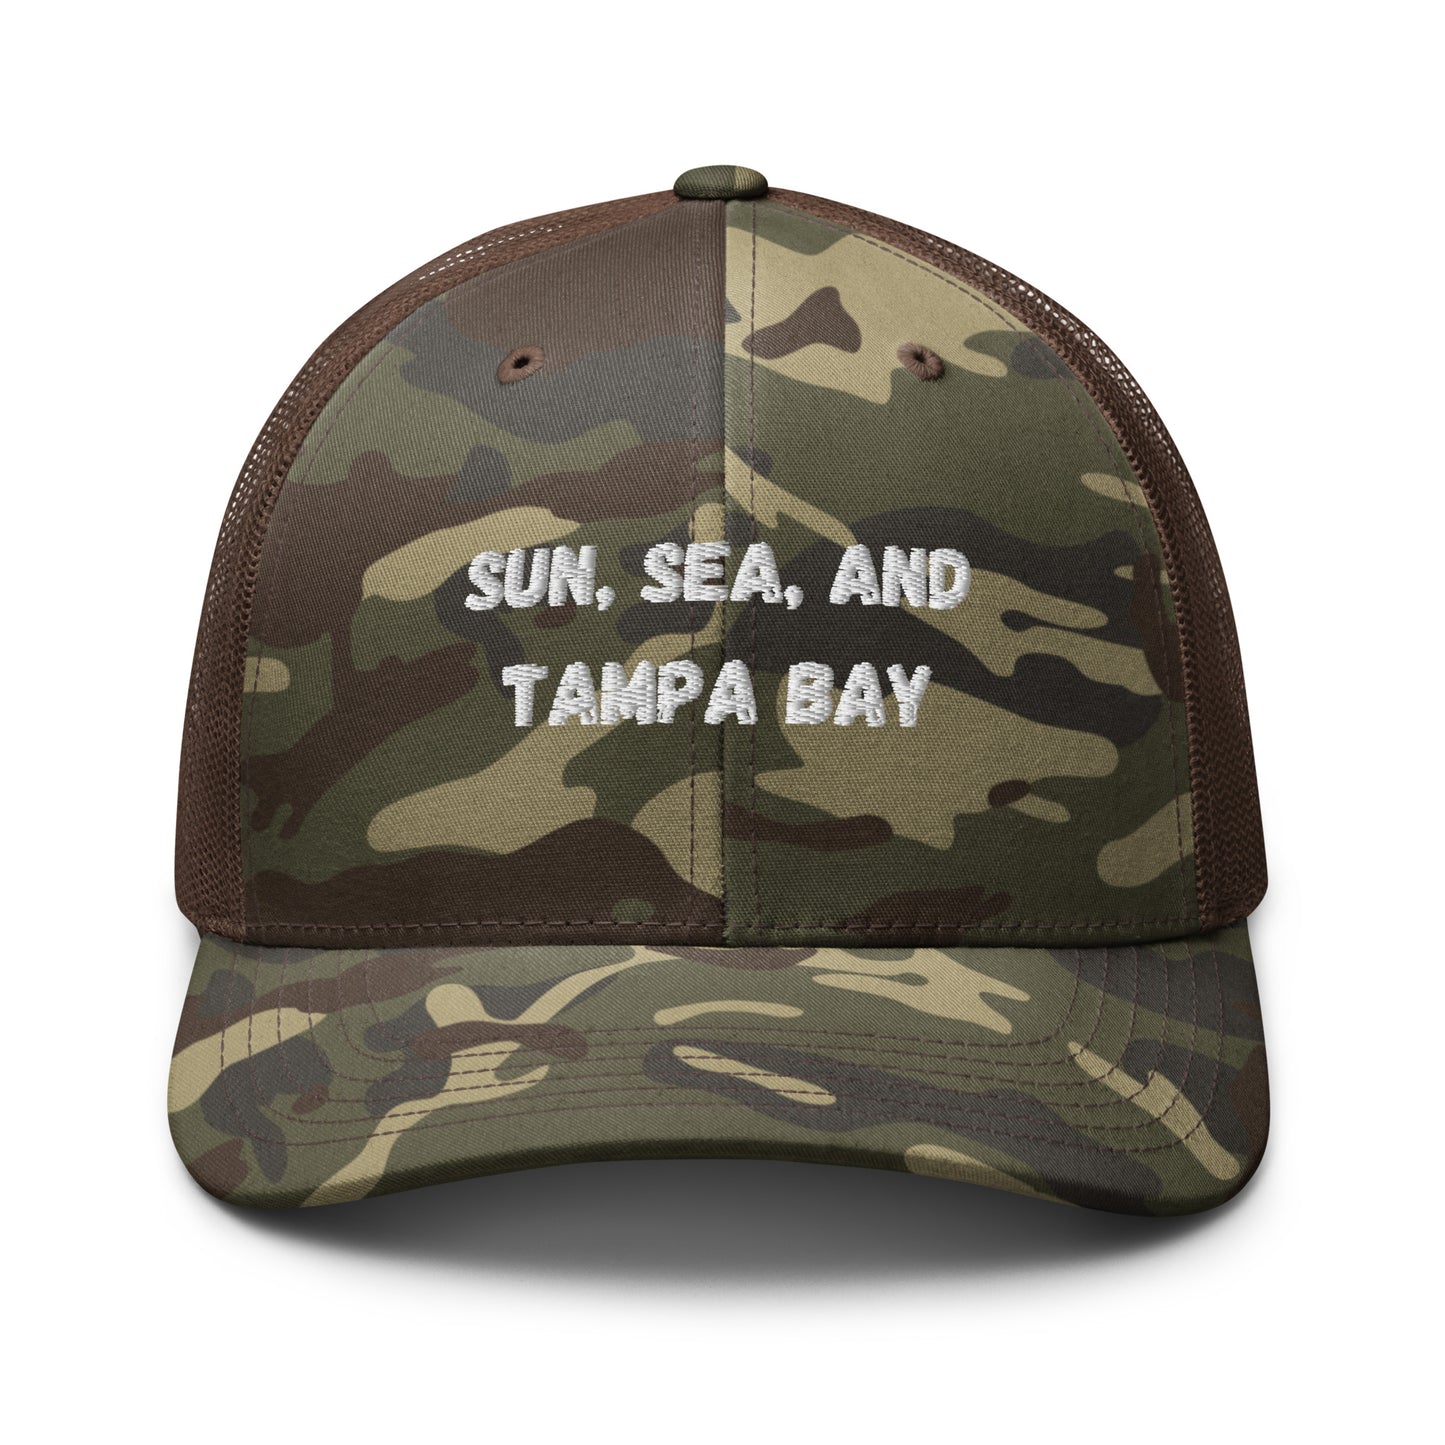 Sun, Sea, and Tampa Bay Trucker Hat - Camo Front